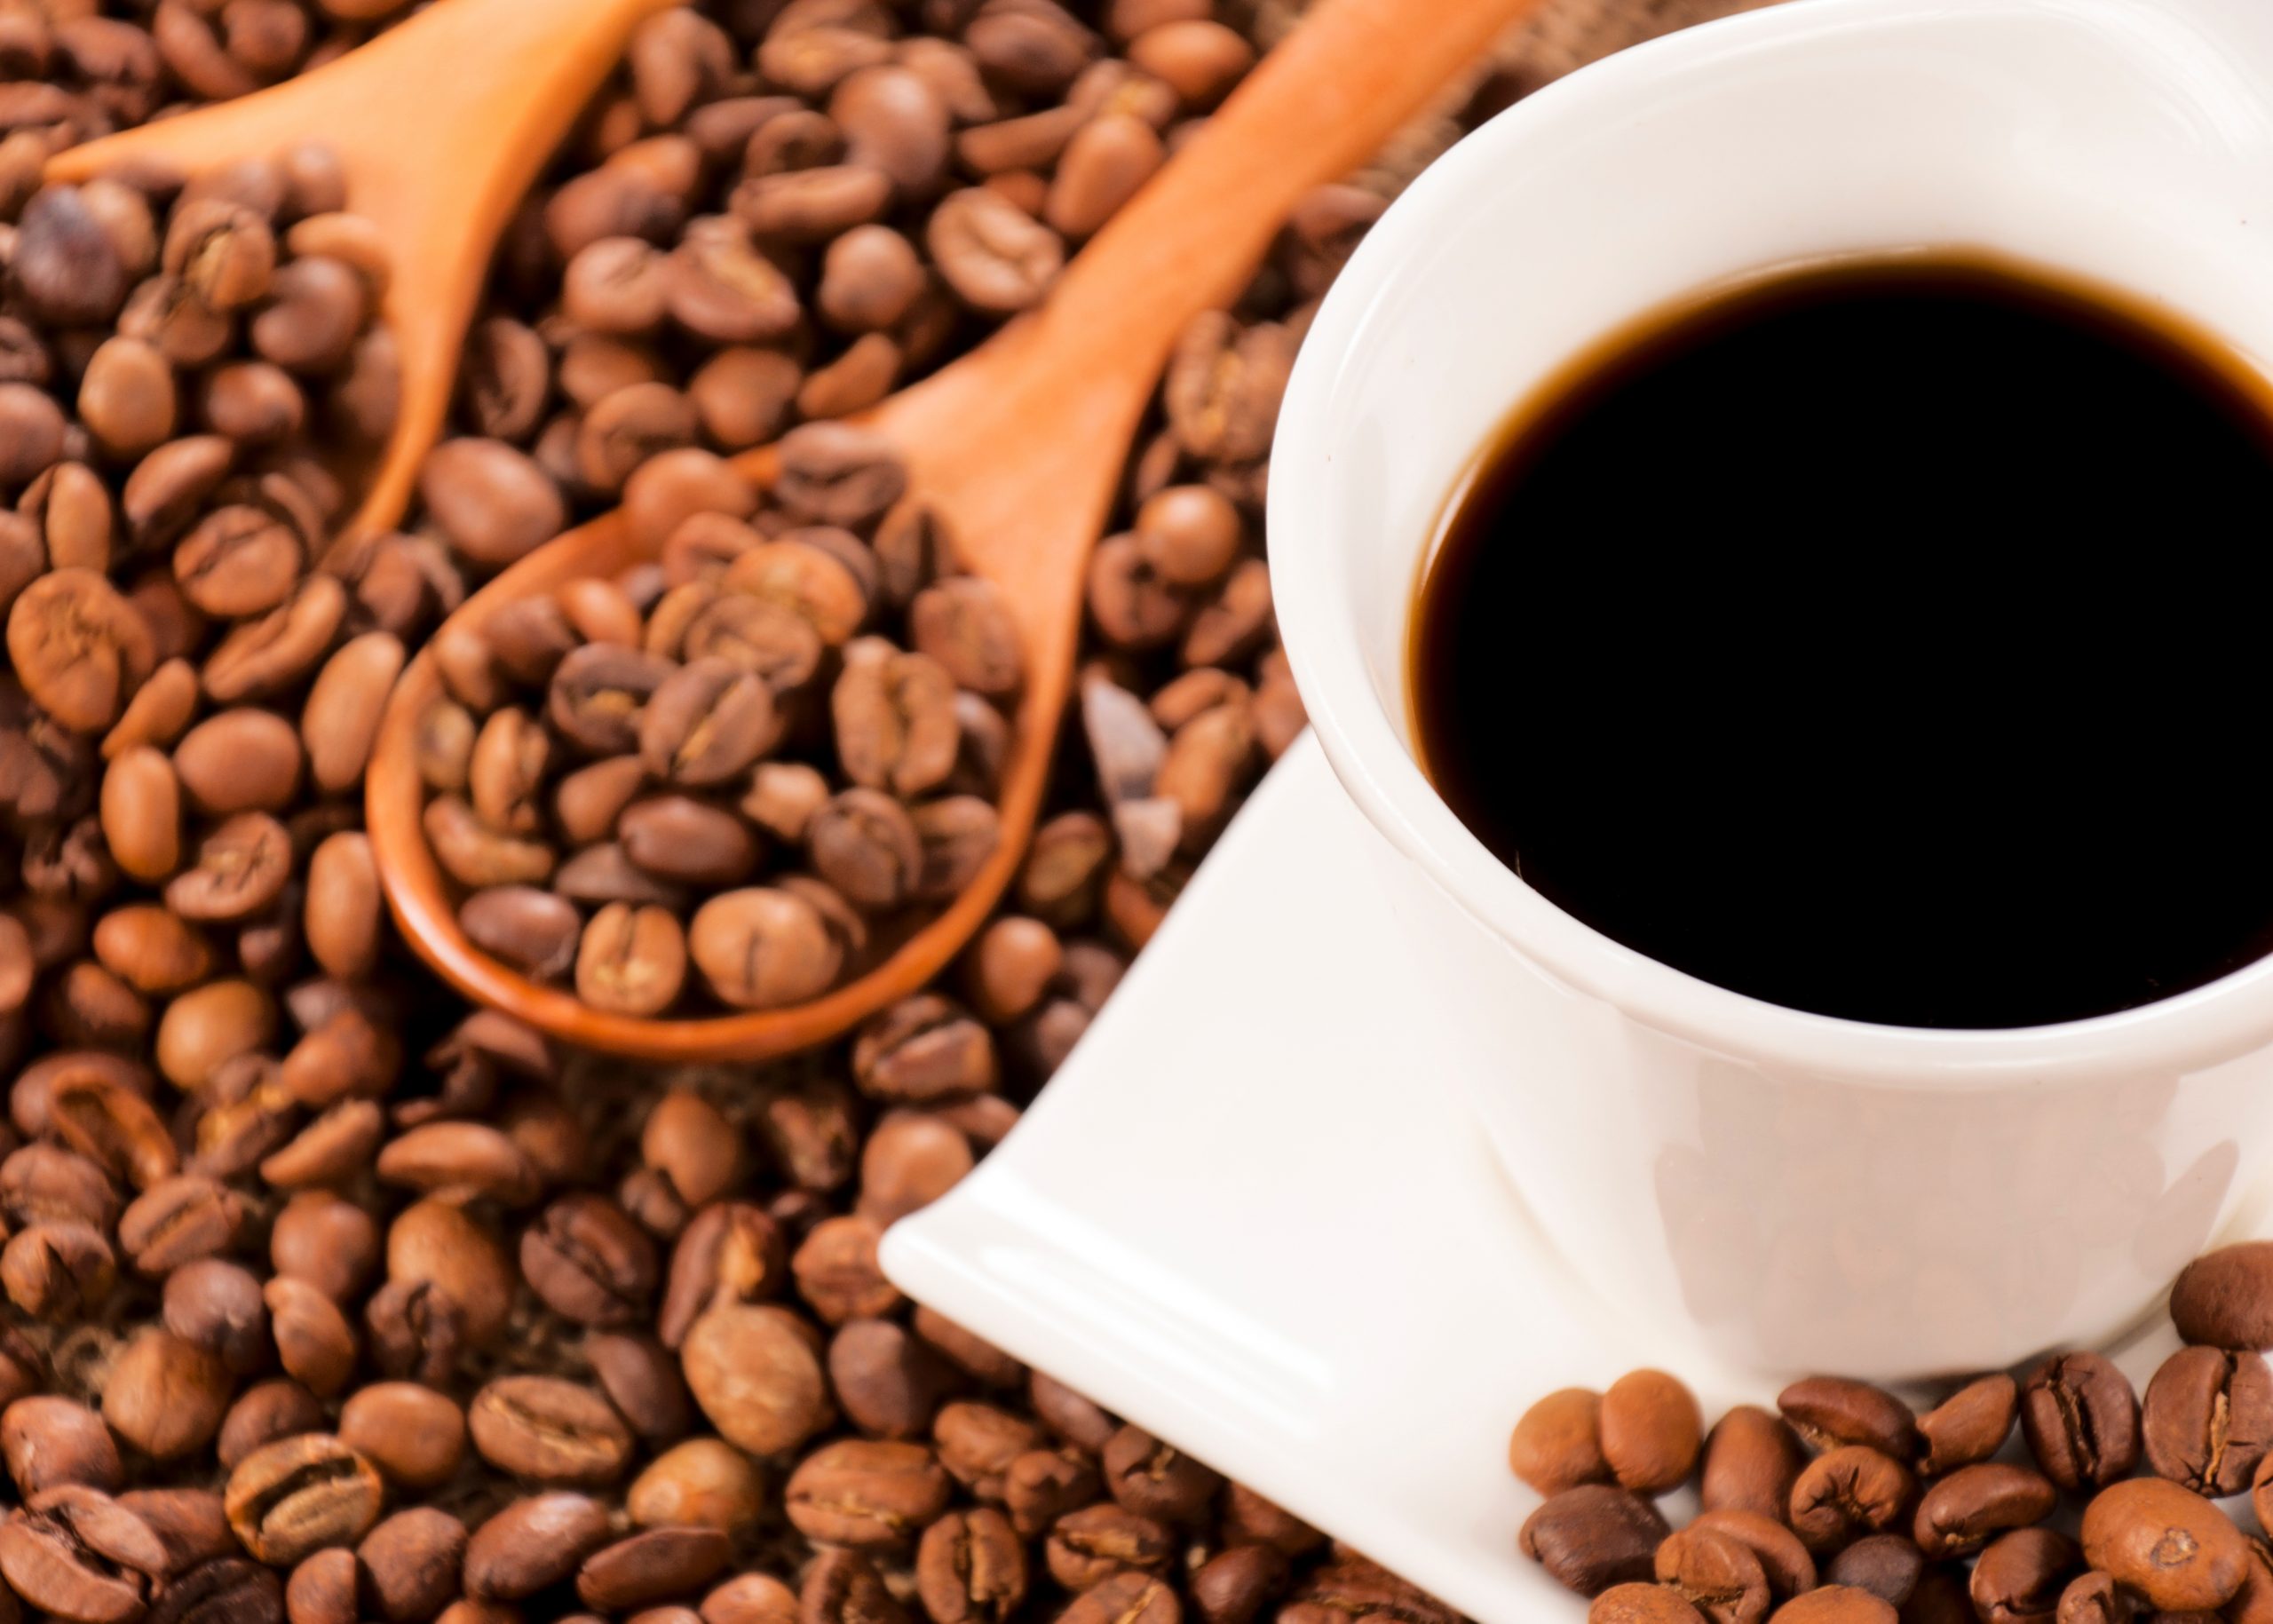 How does caffeine work for weight loss